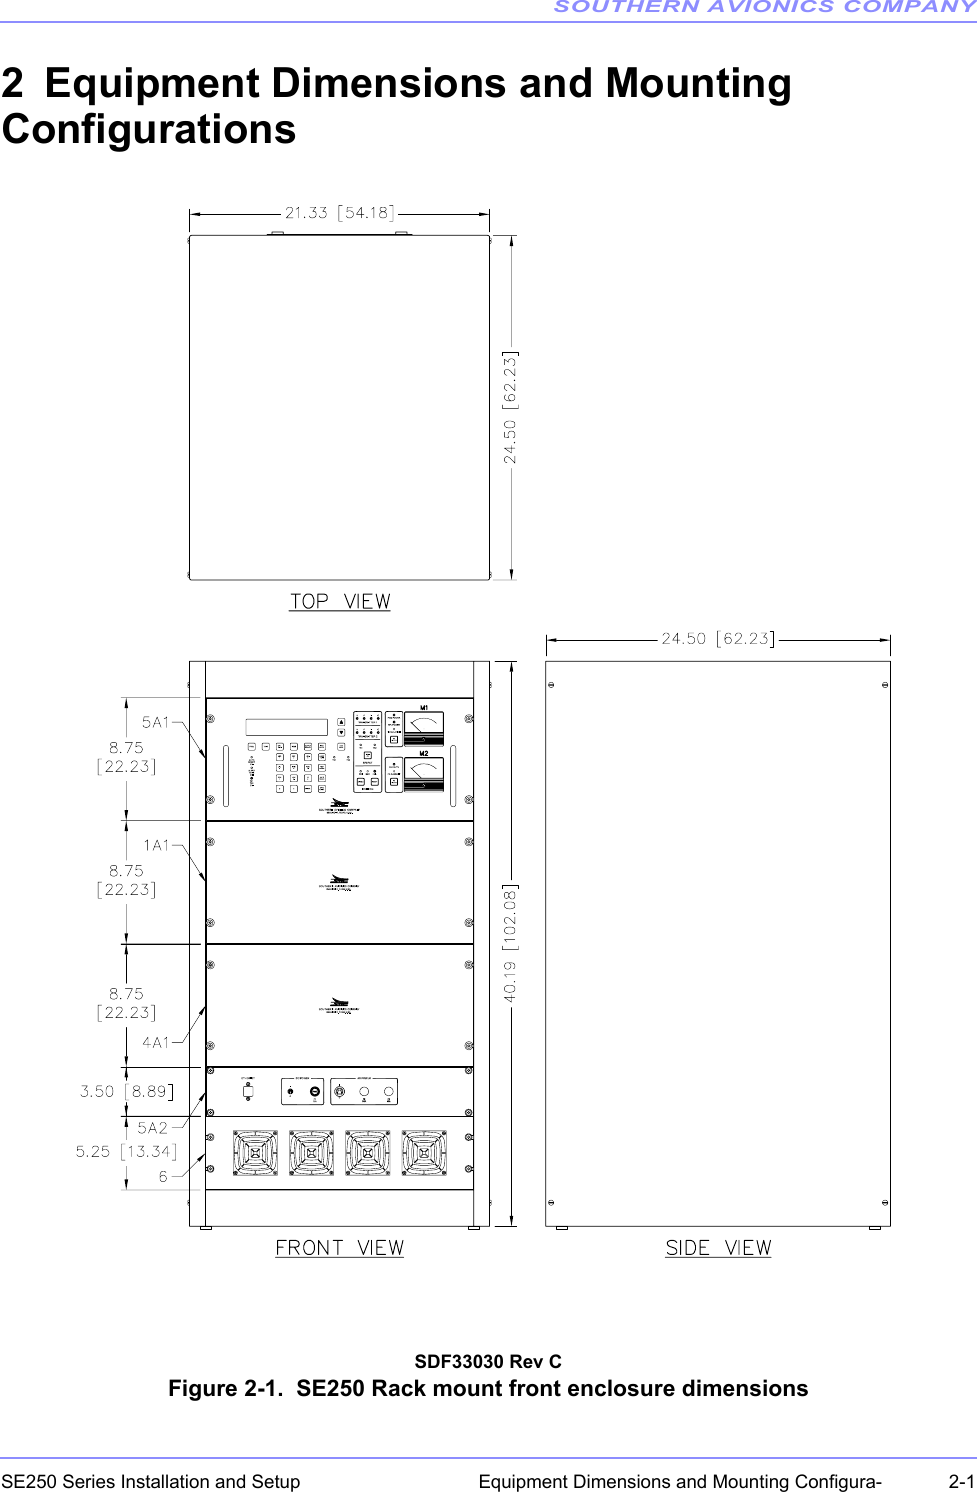 SOUTHERN AVIONICS COMPANYSE250 Series Installation and Setup  2-1Equipment Dimensions and Mounting Configura-2 Equipment Dimensions and Mounting ConfigurationsSDF33030 Rev CFigure 2-1.  SE250 Rack mount front enclosure dimensions 